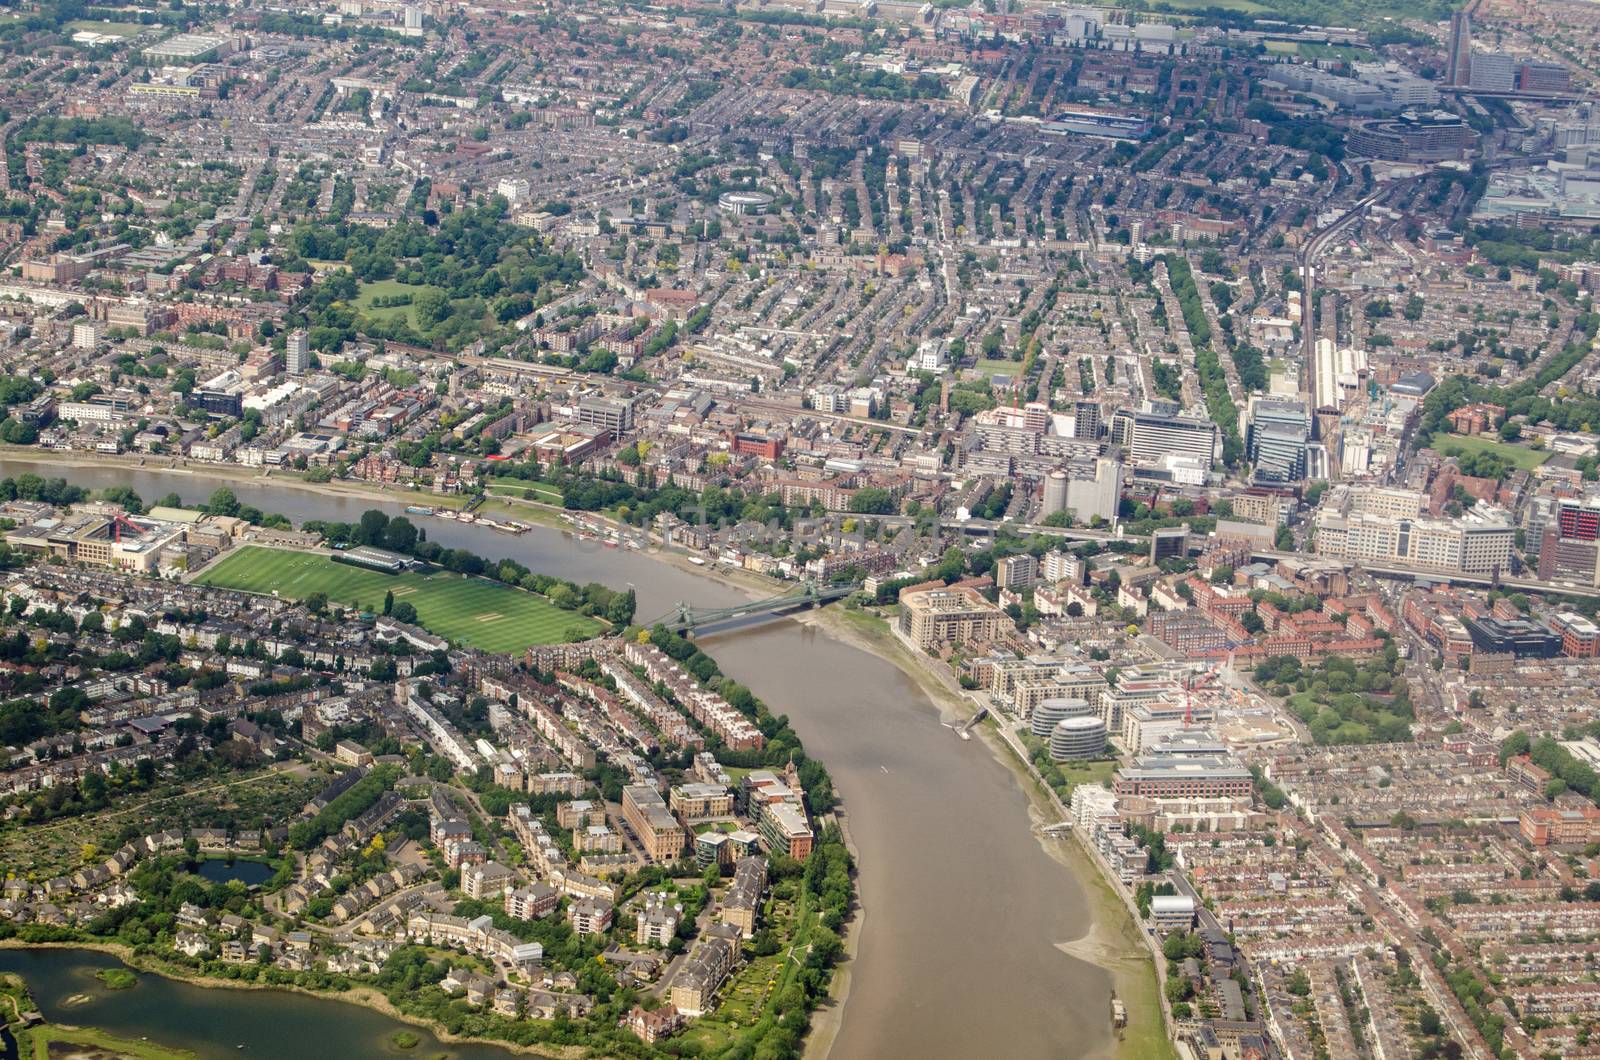 Aerial view of the River Thames as it flows between Hammersmith and Barnes in West London on a sunny summer day.